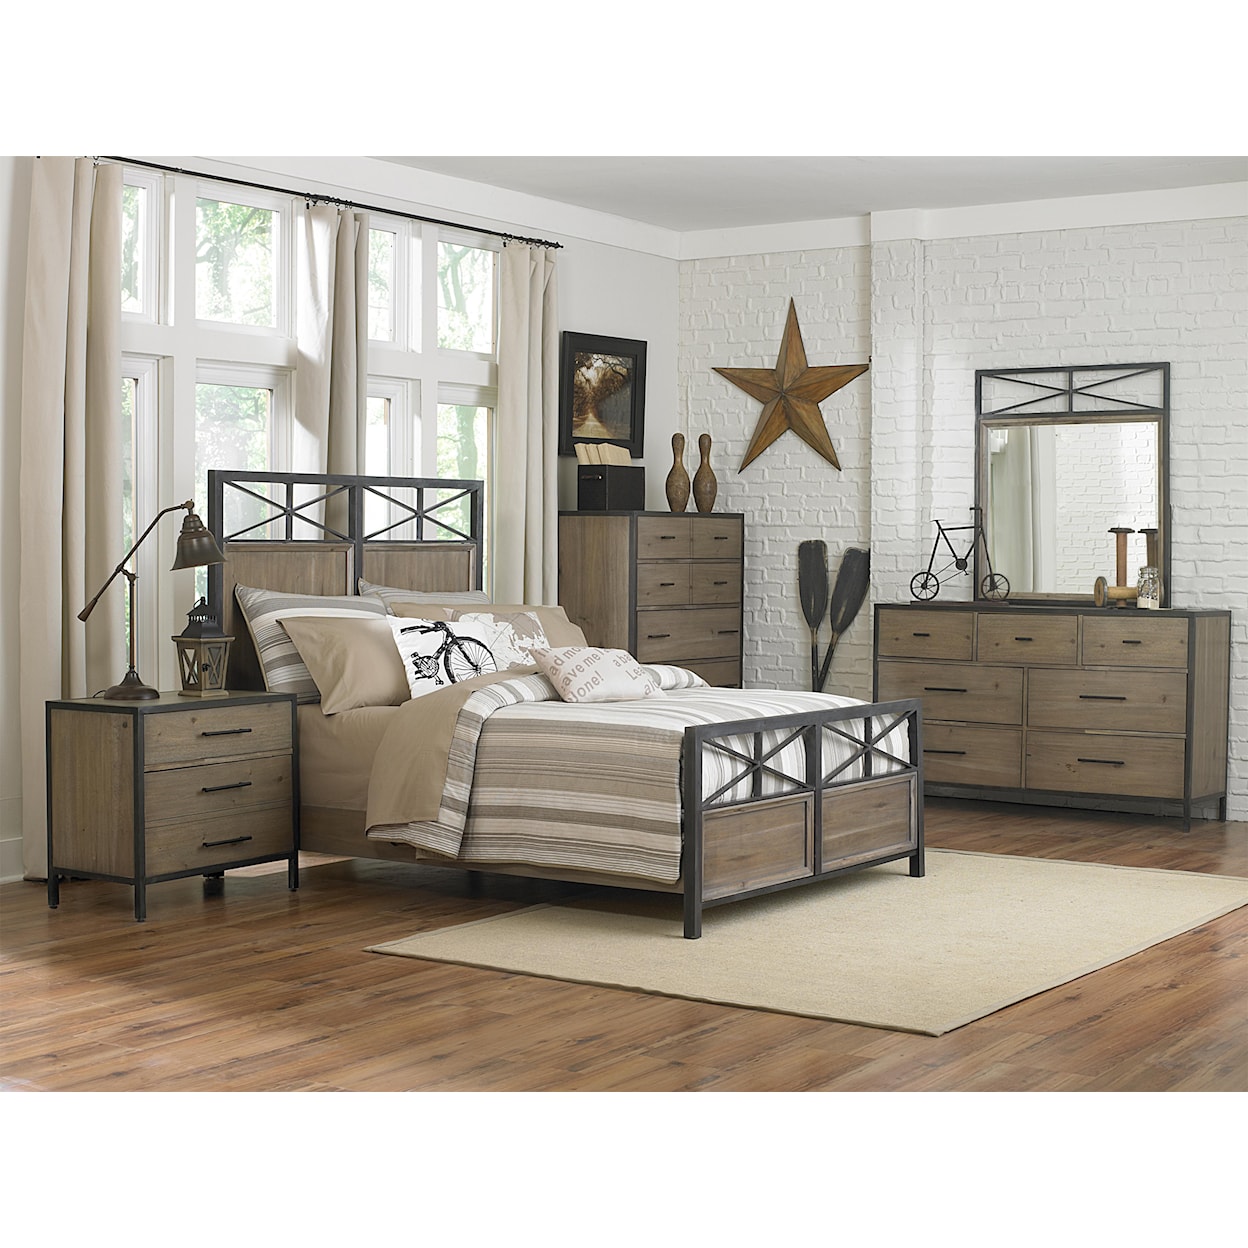 Next Generation by Magnussen Bailey Full Metal &Wood Panel Bed